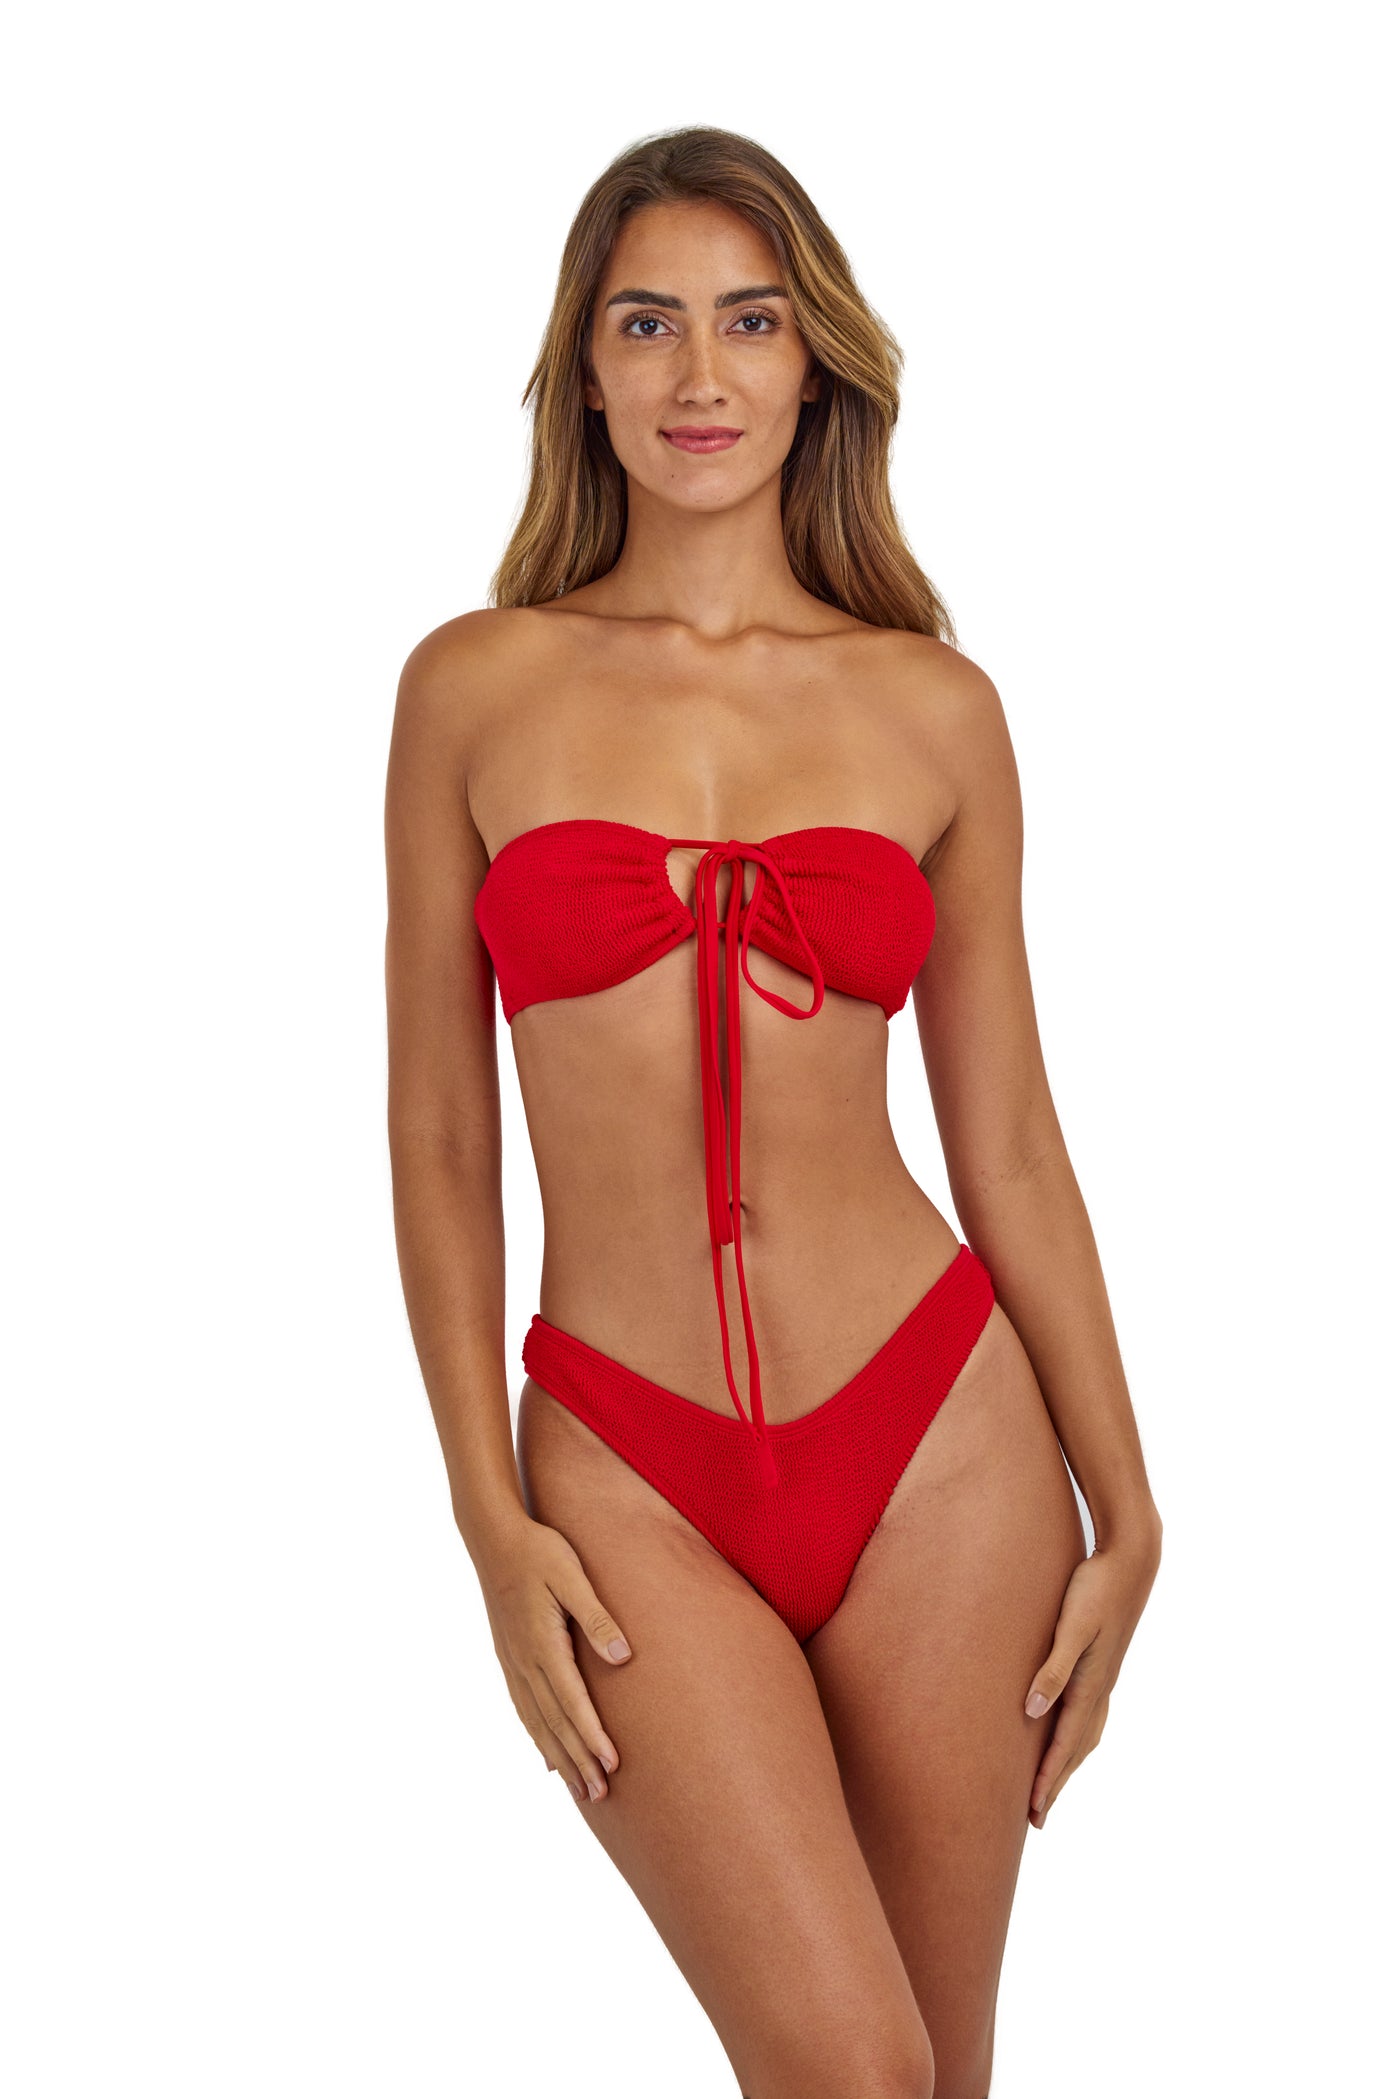 Venice Multi Style String One Size Bikini TOP ONLY with clasp